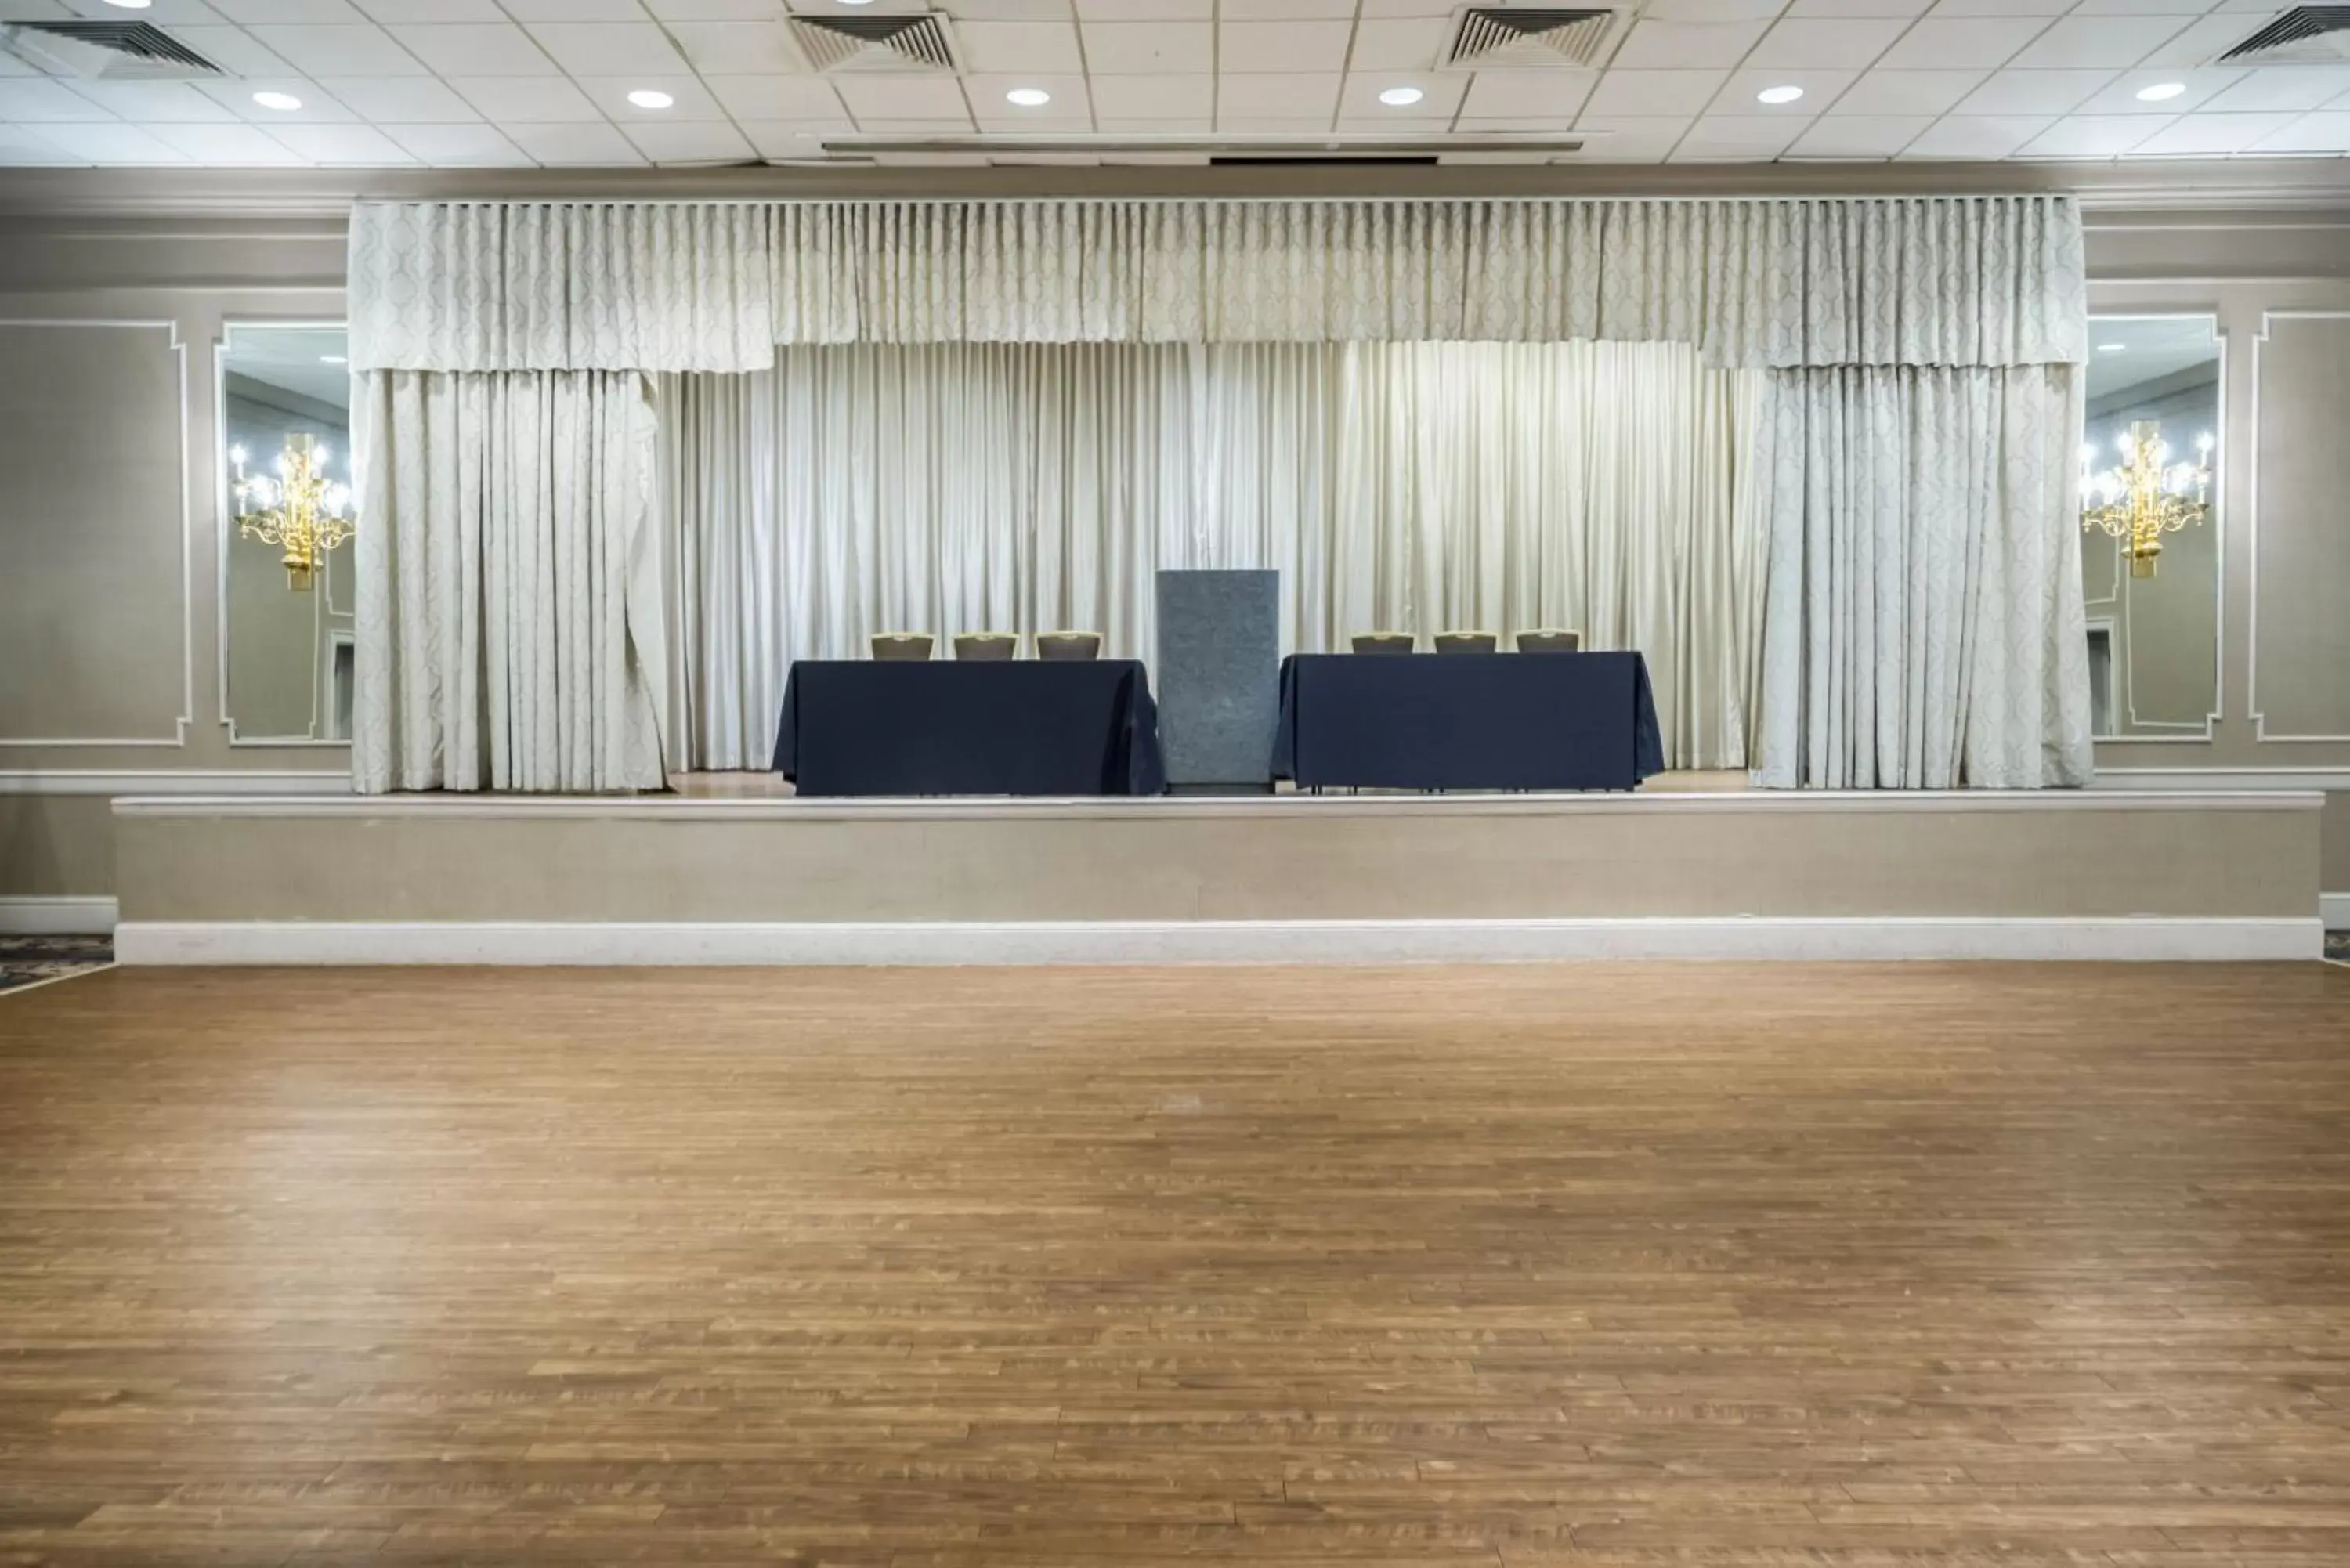 Banquet/Function facilities in enVision Hotel & Conference Center Mansfield-Foxboro